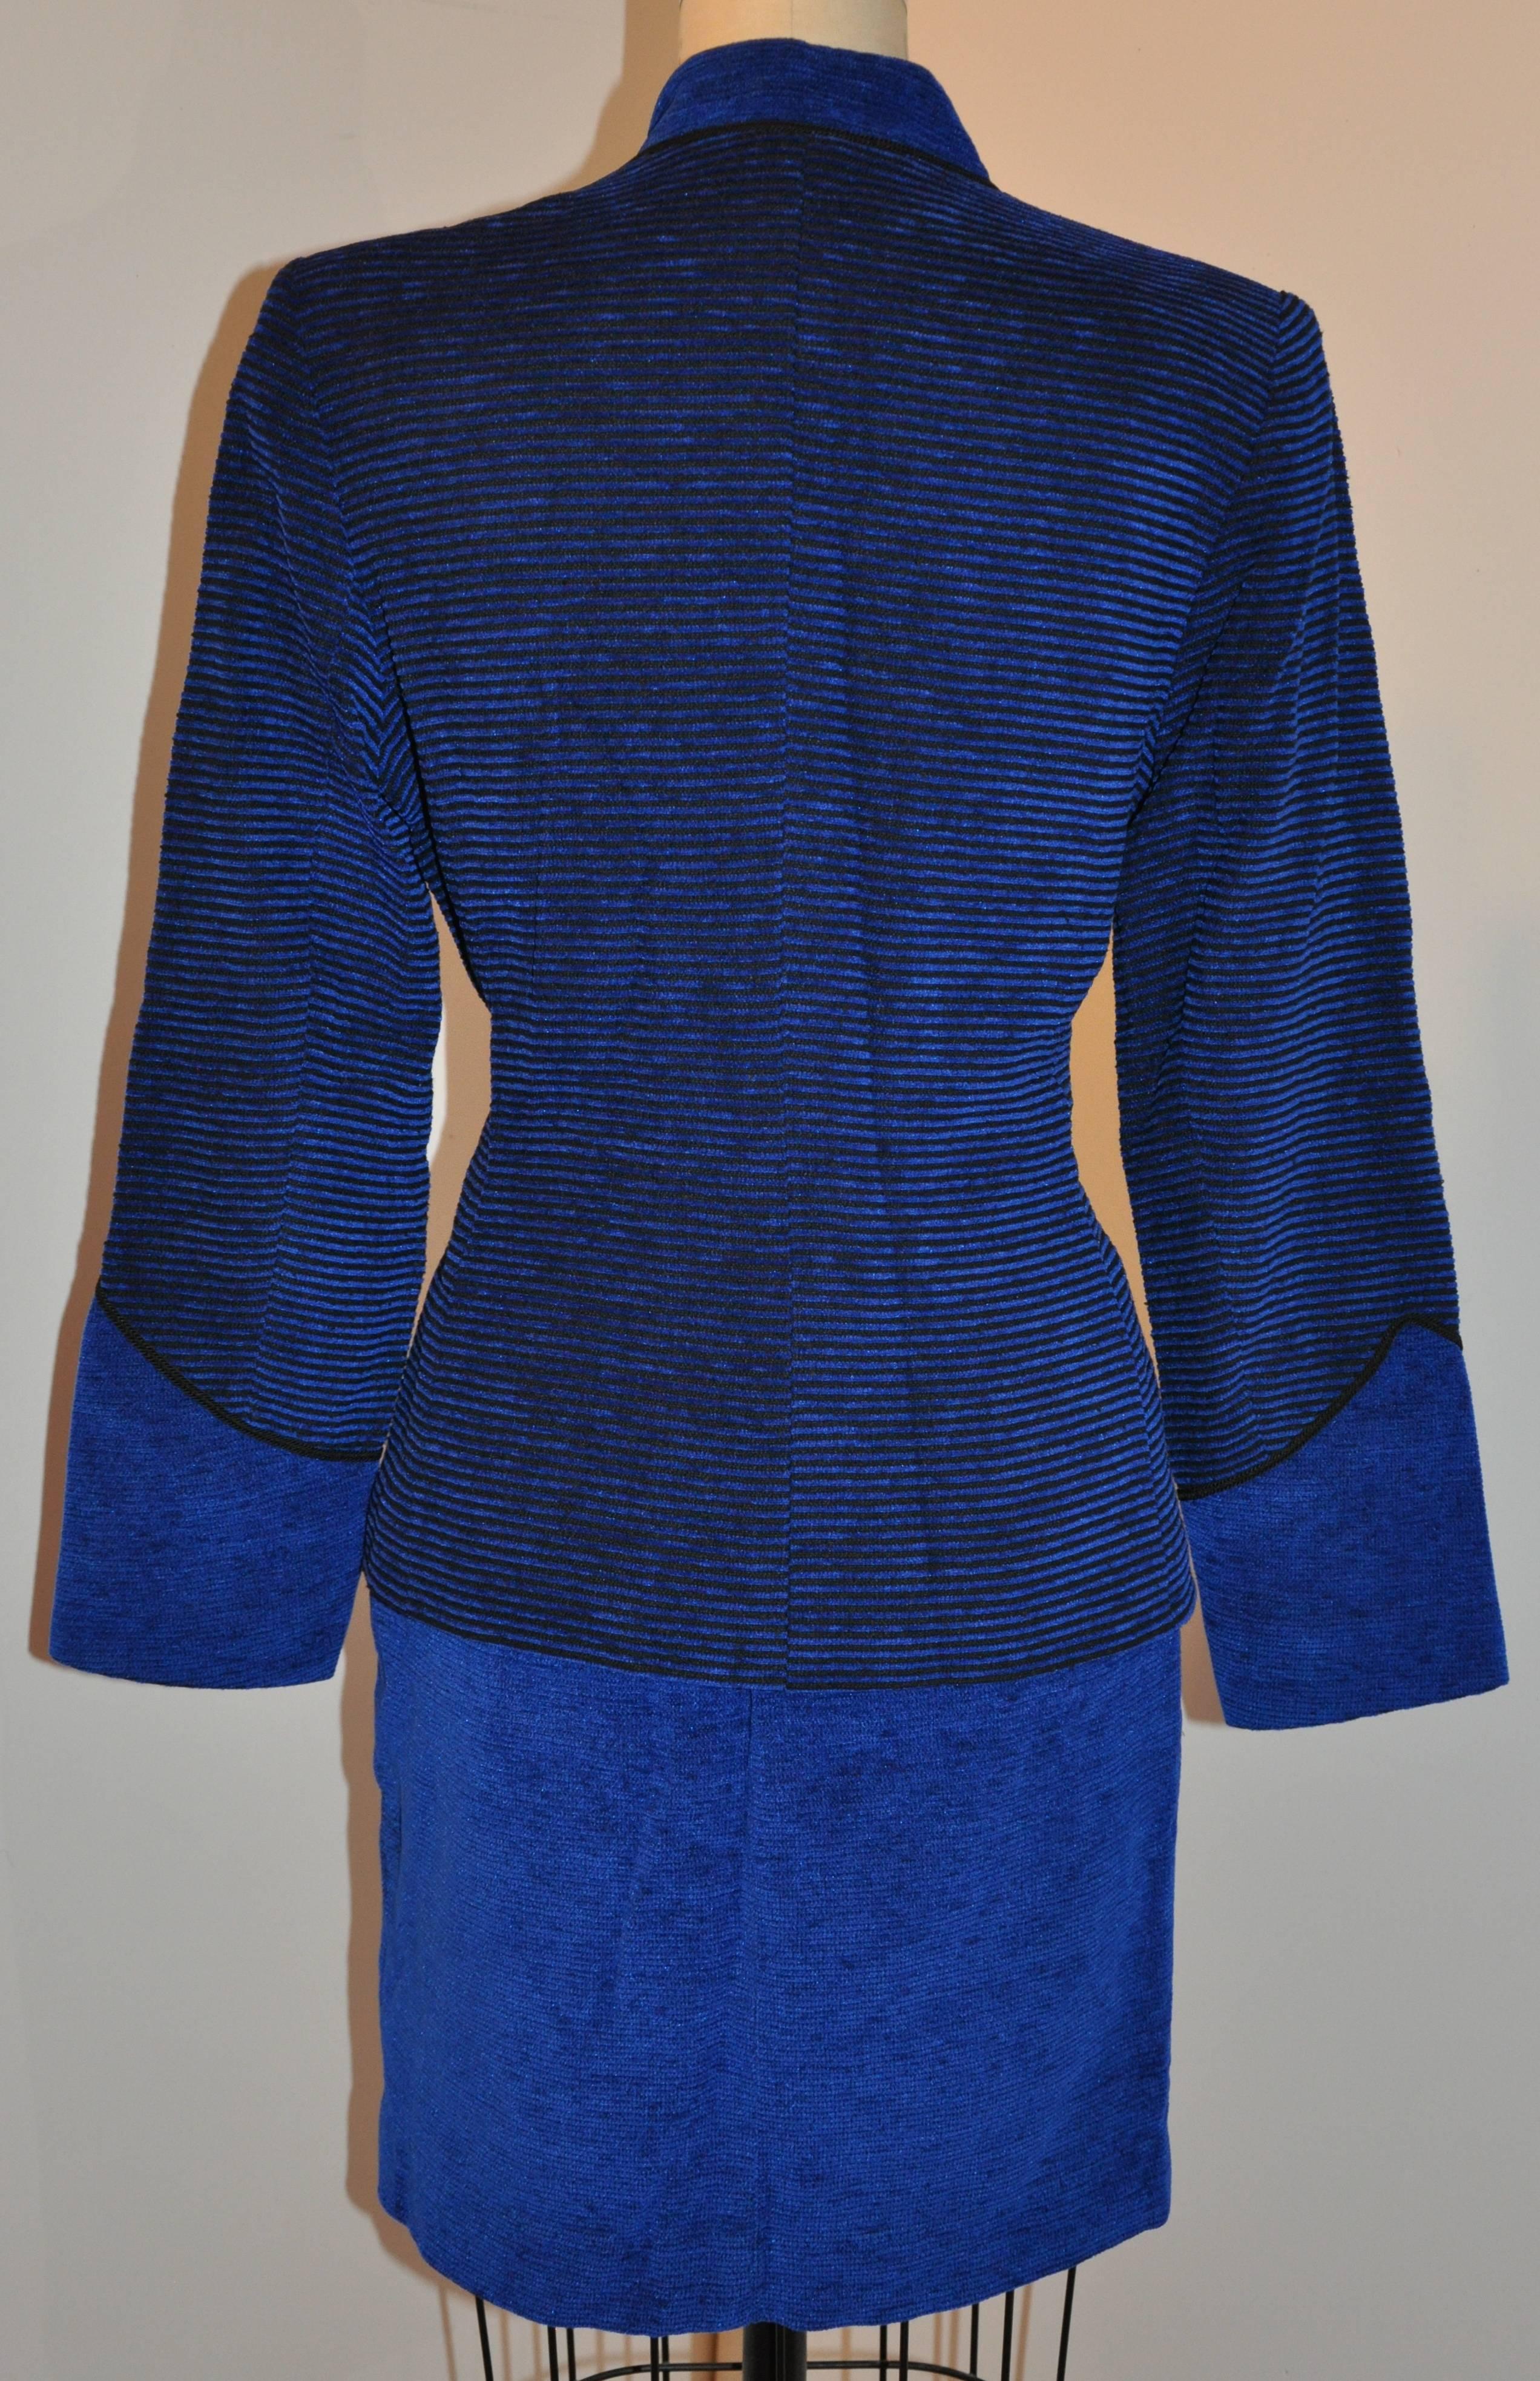 Yves Saint Laurent wonderful combination of Lapis blue accented with black skirt and matching jacket emsemble accented with a mandarin collar which measures 1 1/2